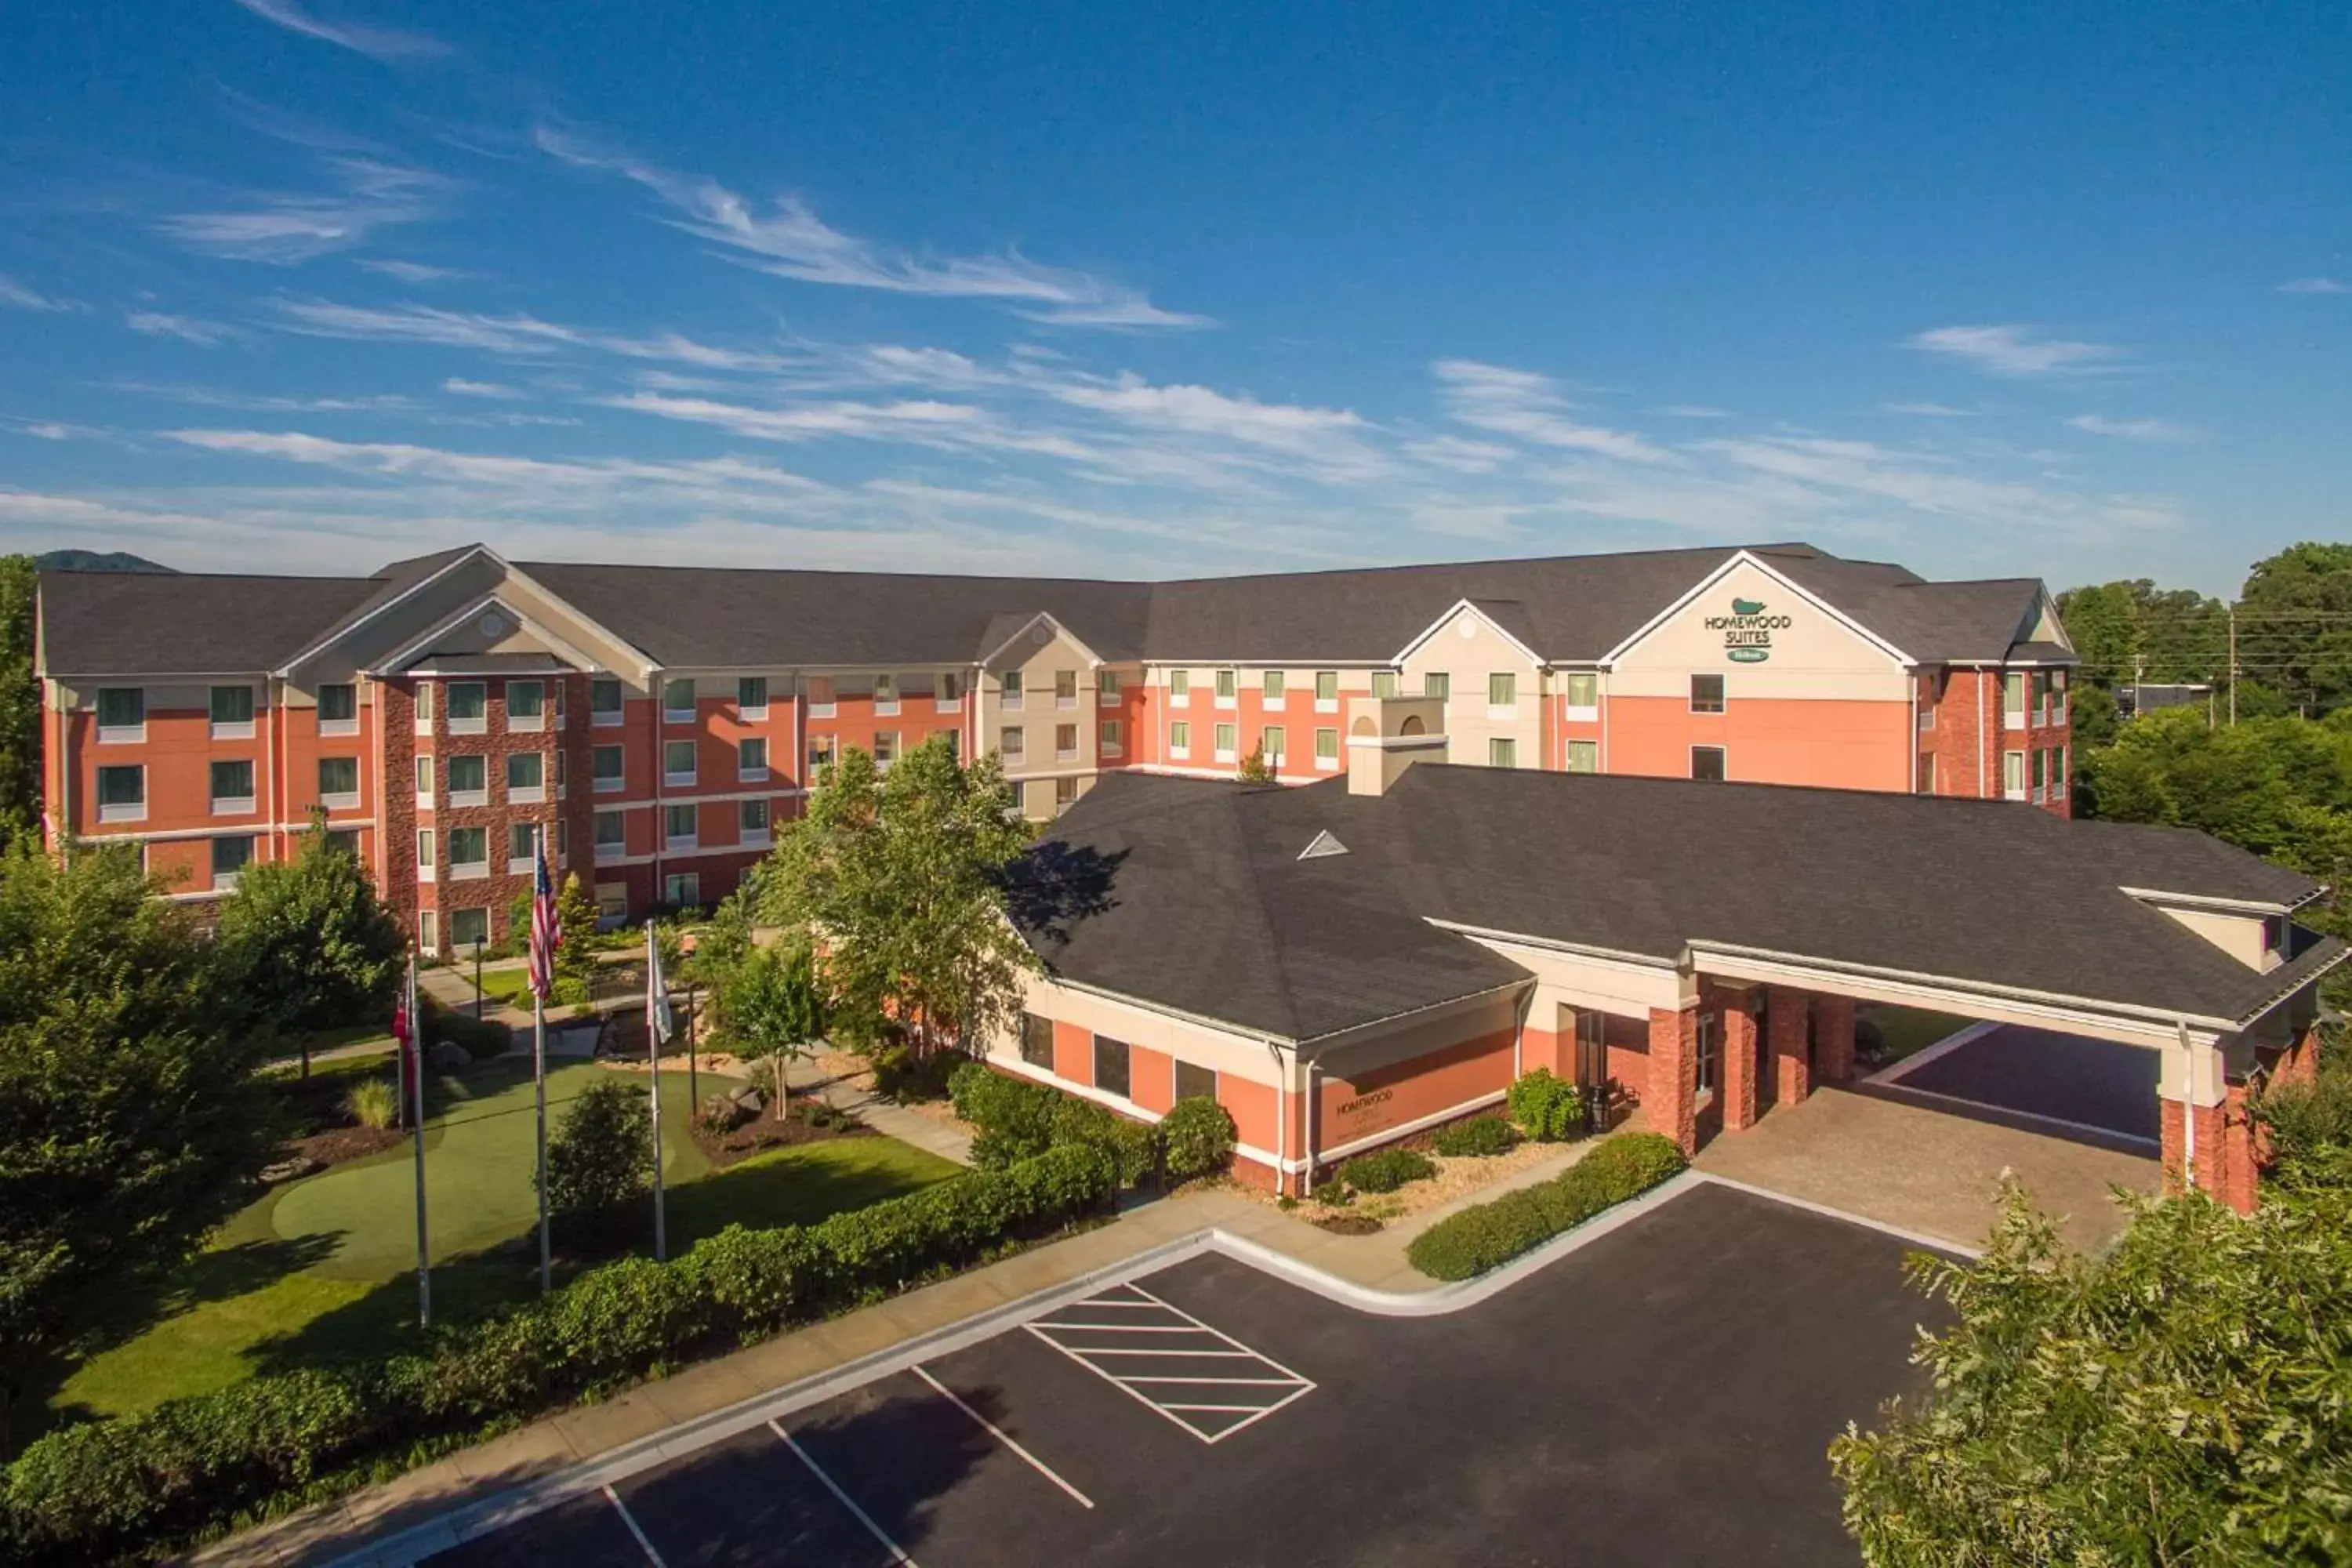 Property building in Homewood Suites by Hilton Atlanta NW/Kennesaw-Town Center